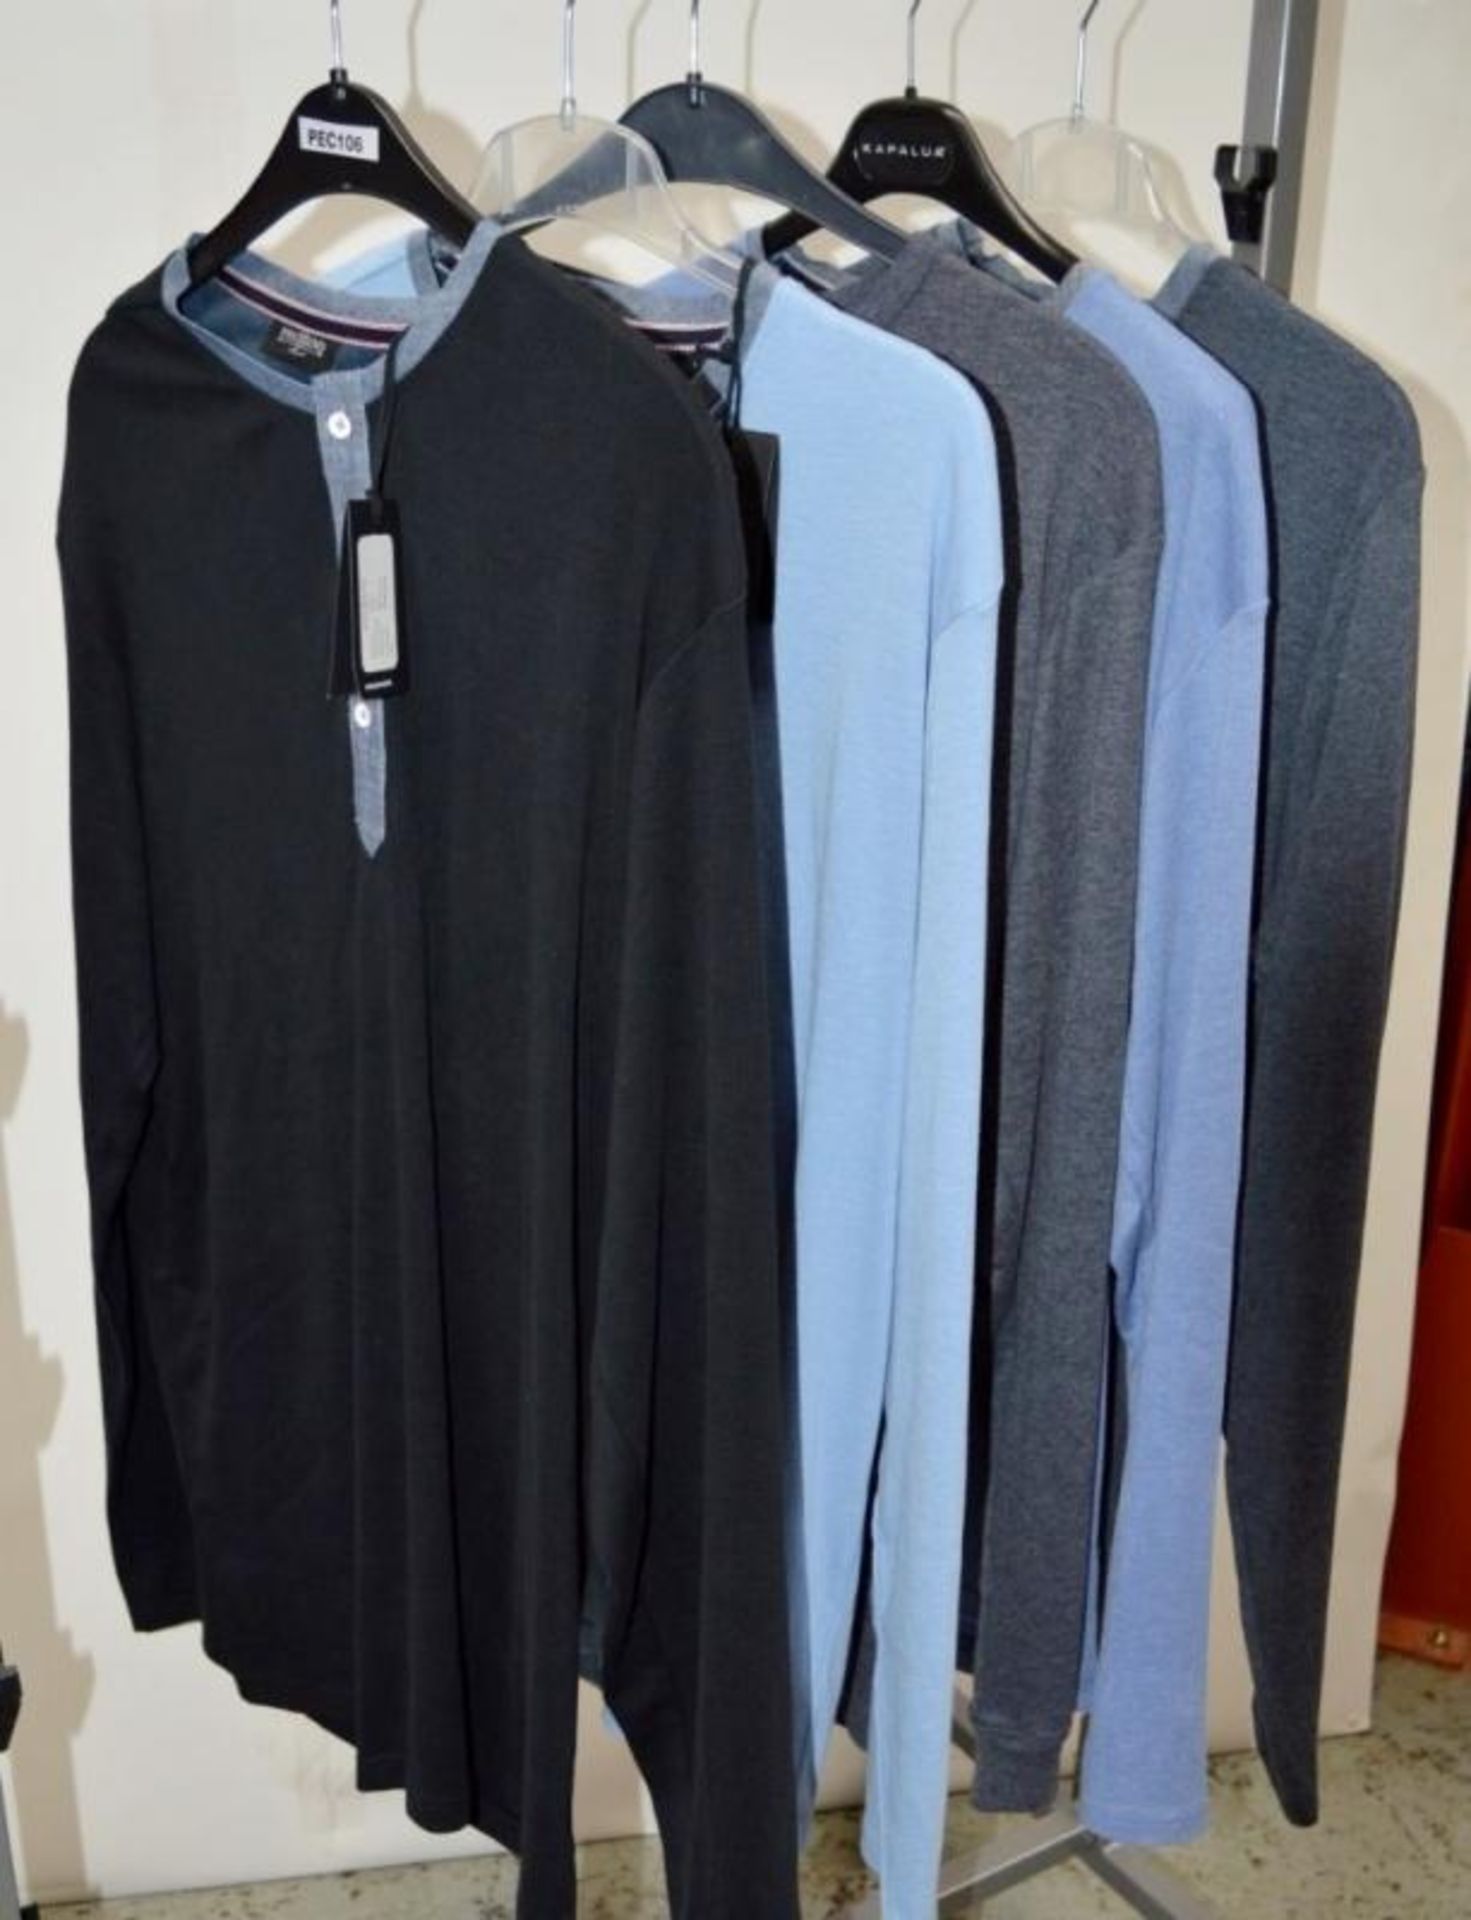 5 x Assorted PRE END Branded Mens Long Sleeve Tops - New Stock With Tags - Recent Retail Closure - - Image 2 of 8